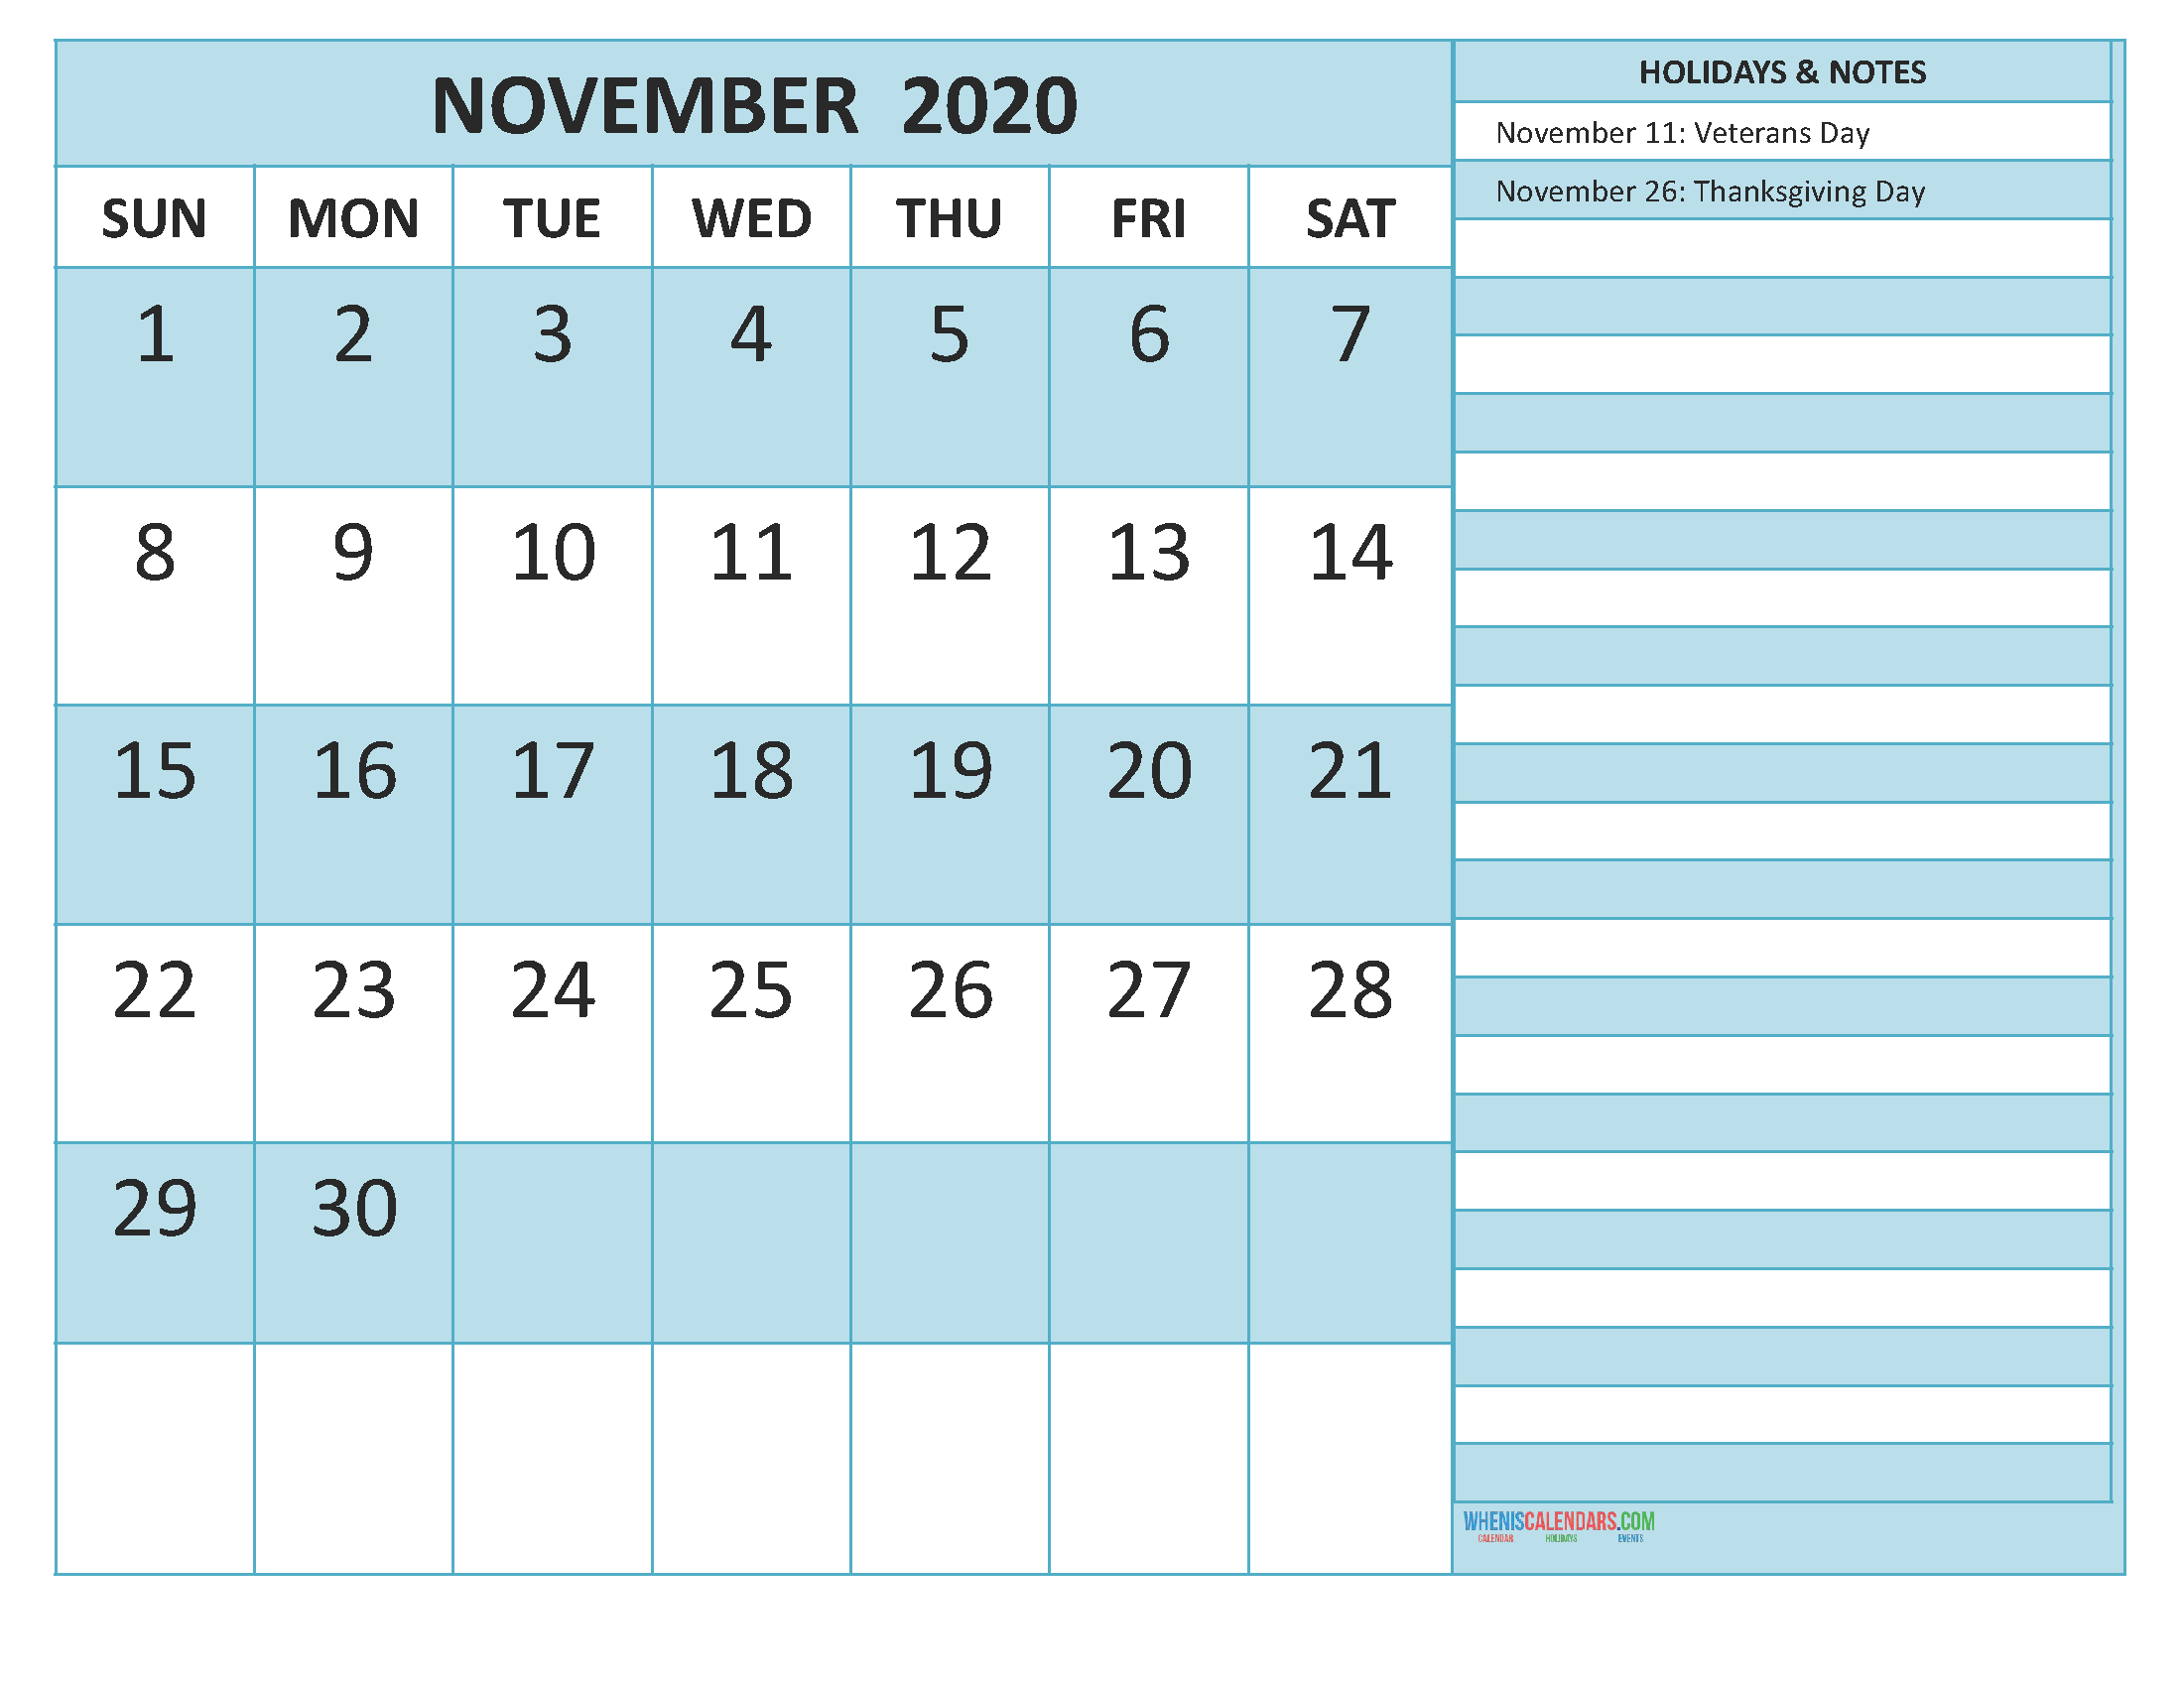 Free Printable Monthly Calendar 2020 November with Holidays